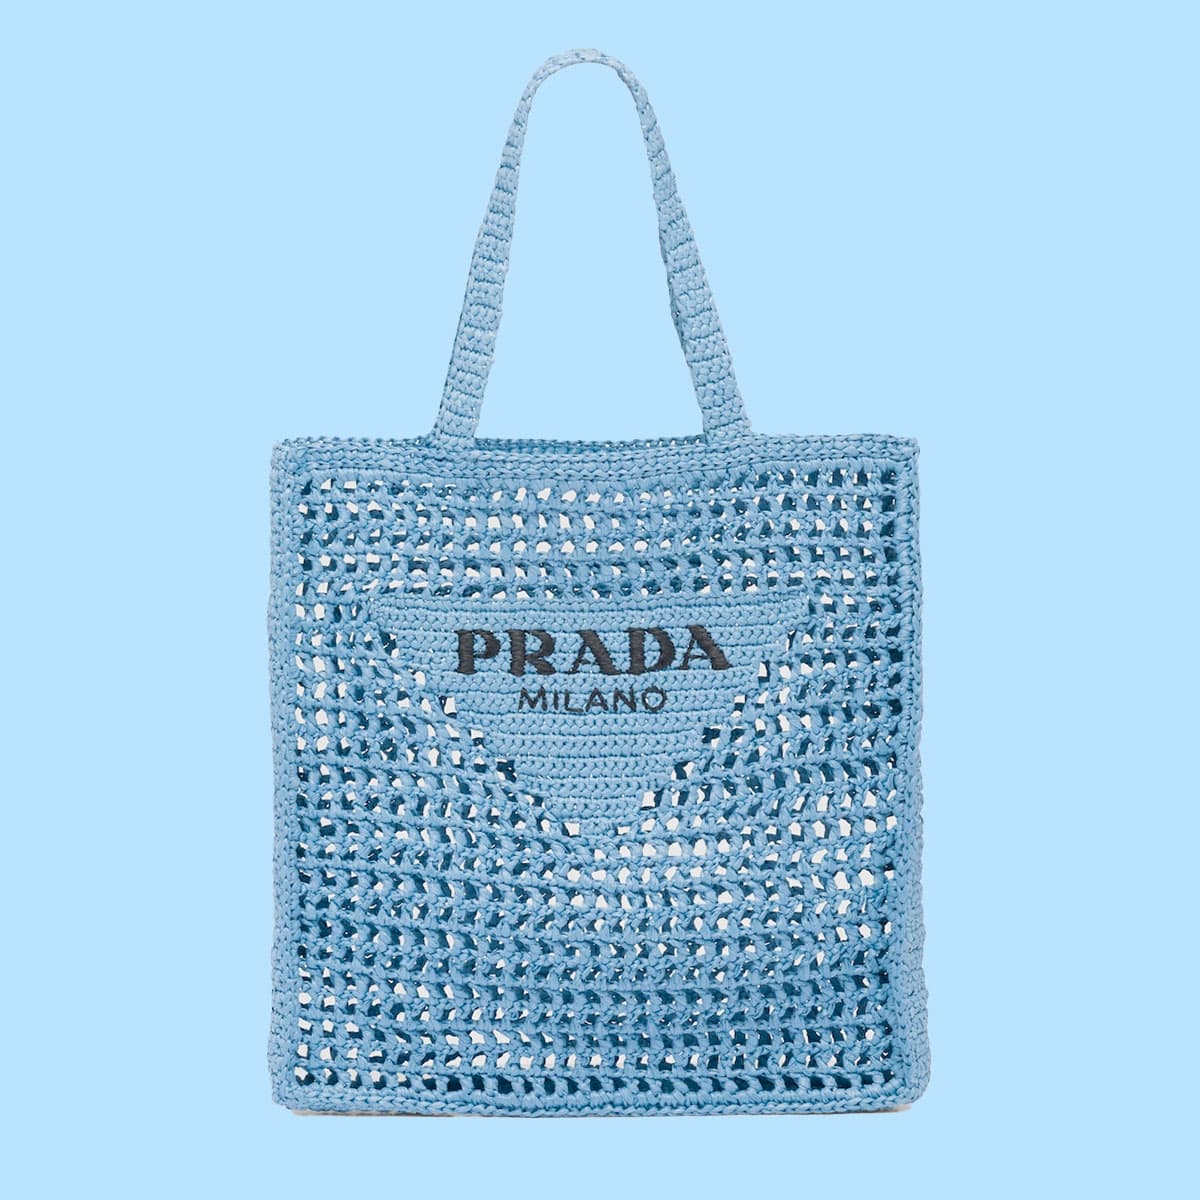 Rebag on Instagram: There's nothing quite like Prada's Saffiano leather,  especially when it's lime-colored and in the shape of the iconic Promenade  bag 💚 #rebag #Prada #pradabag